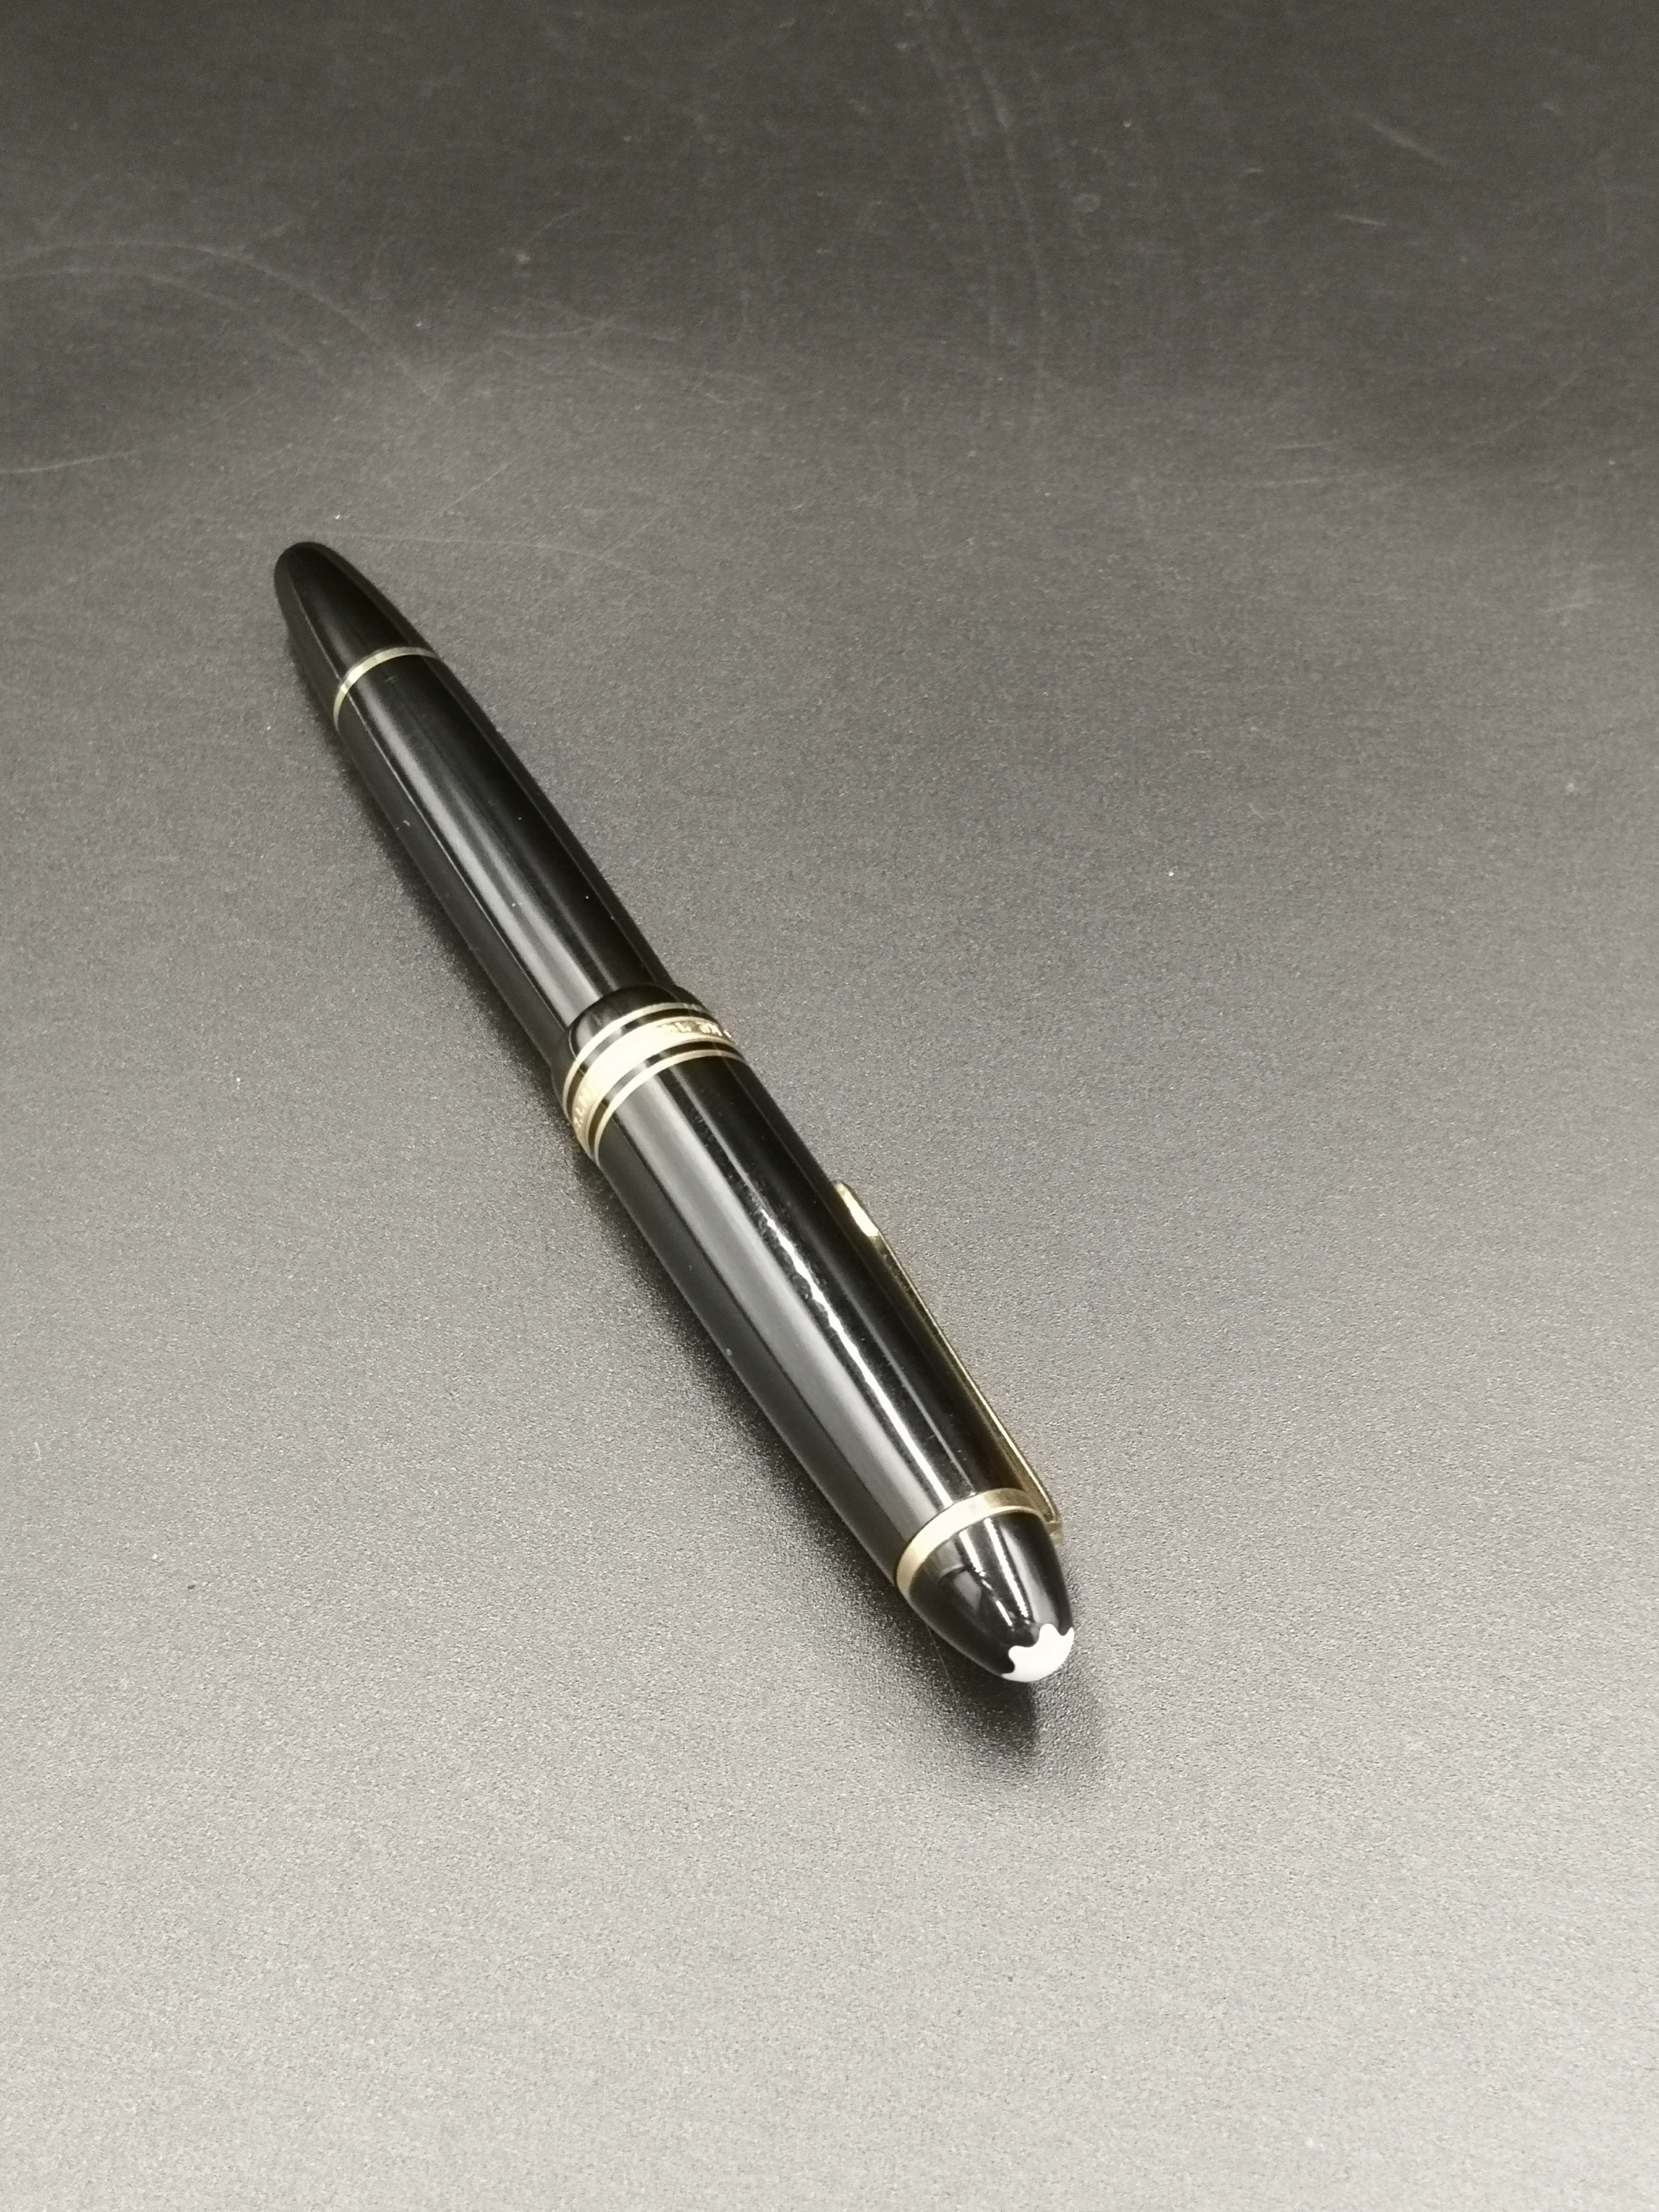 Montblanc Meisterstuck fountain pen - Image 2 of 6